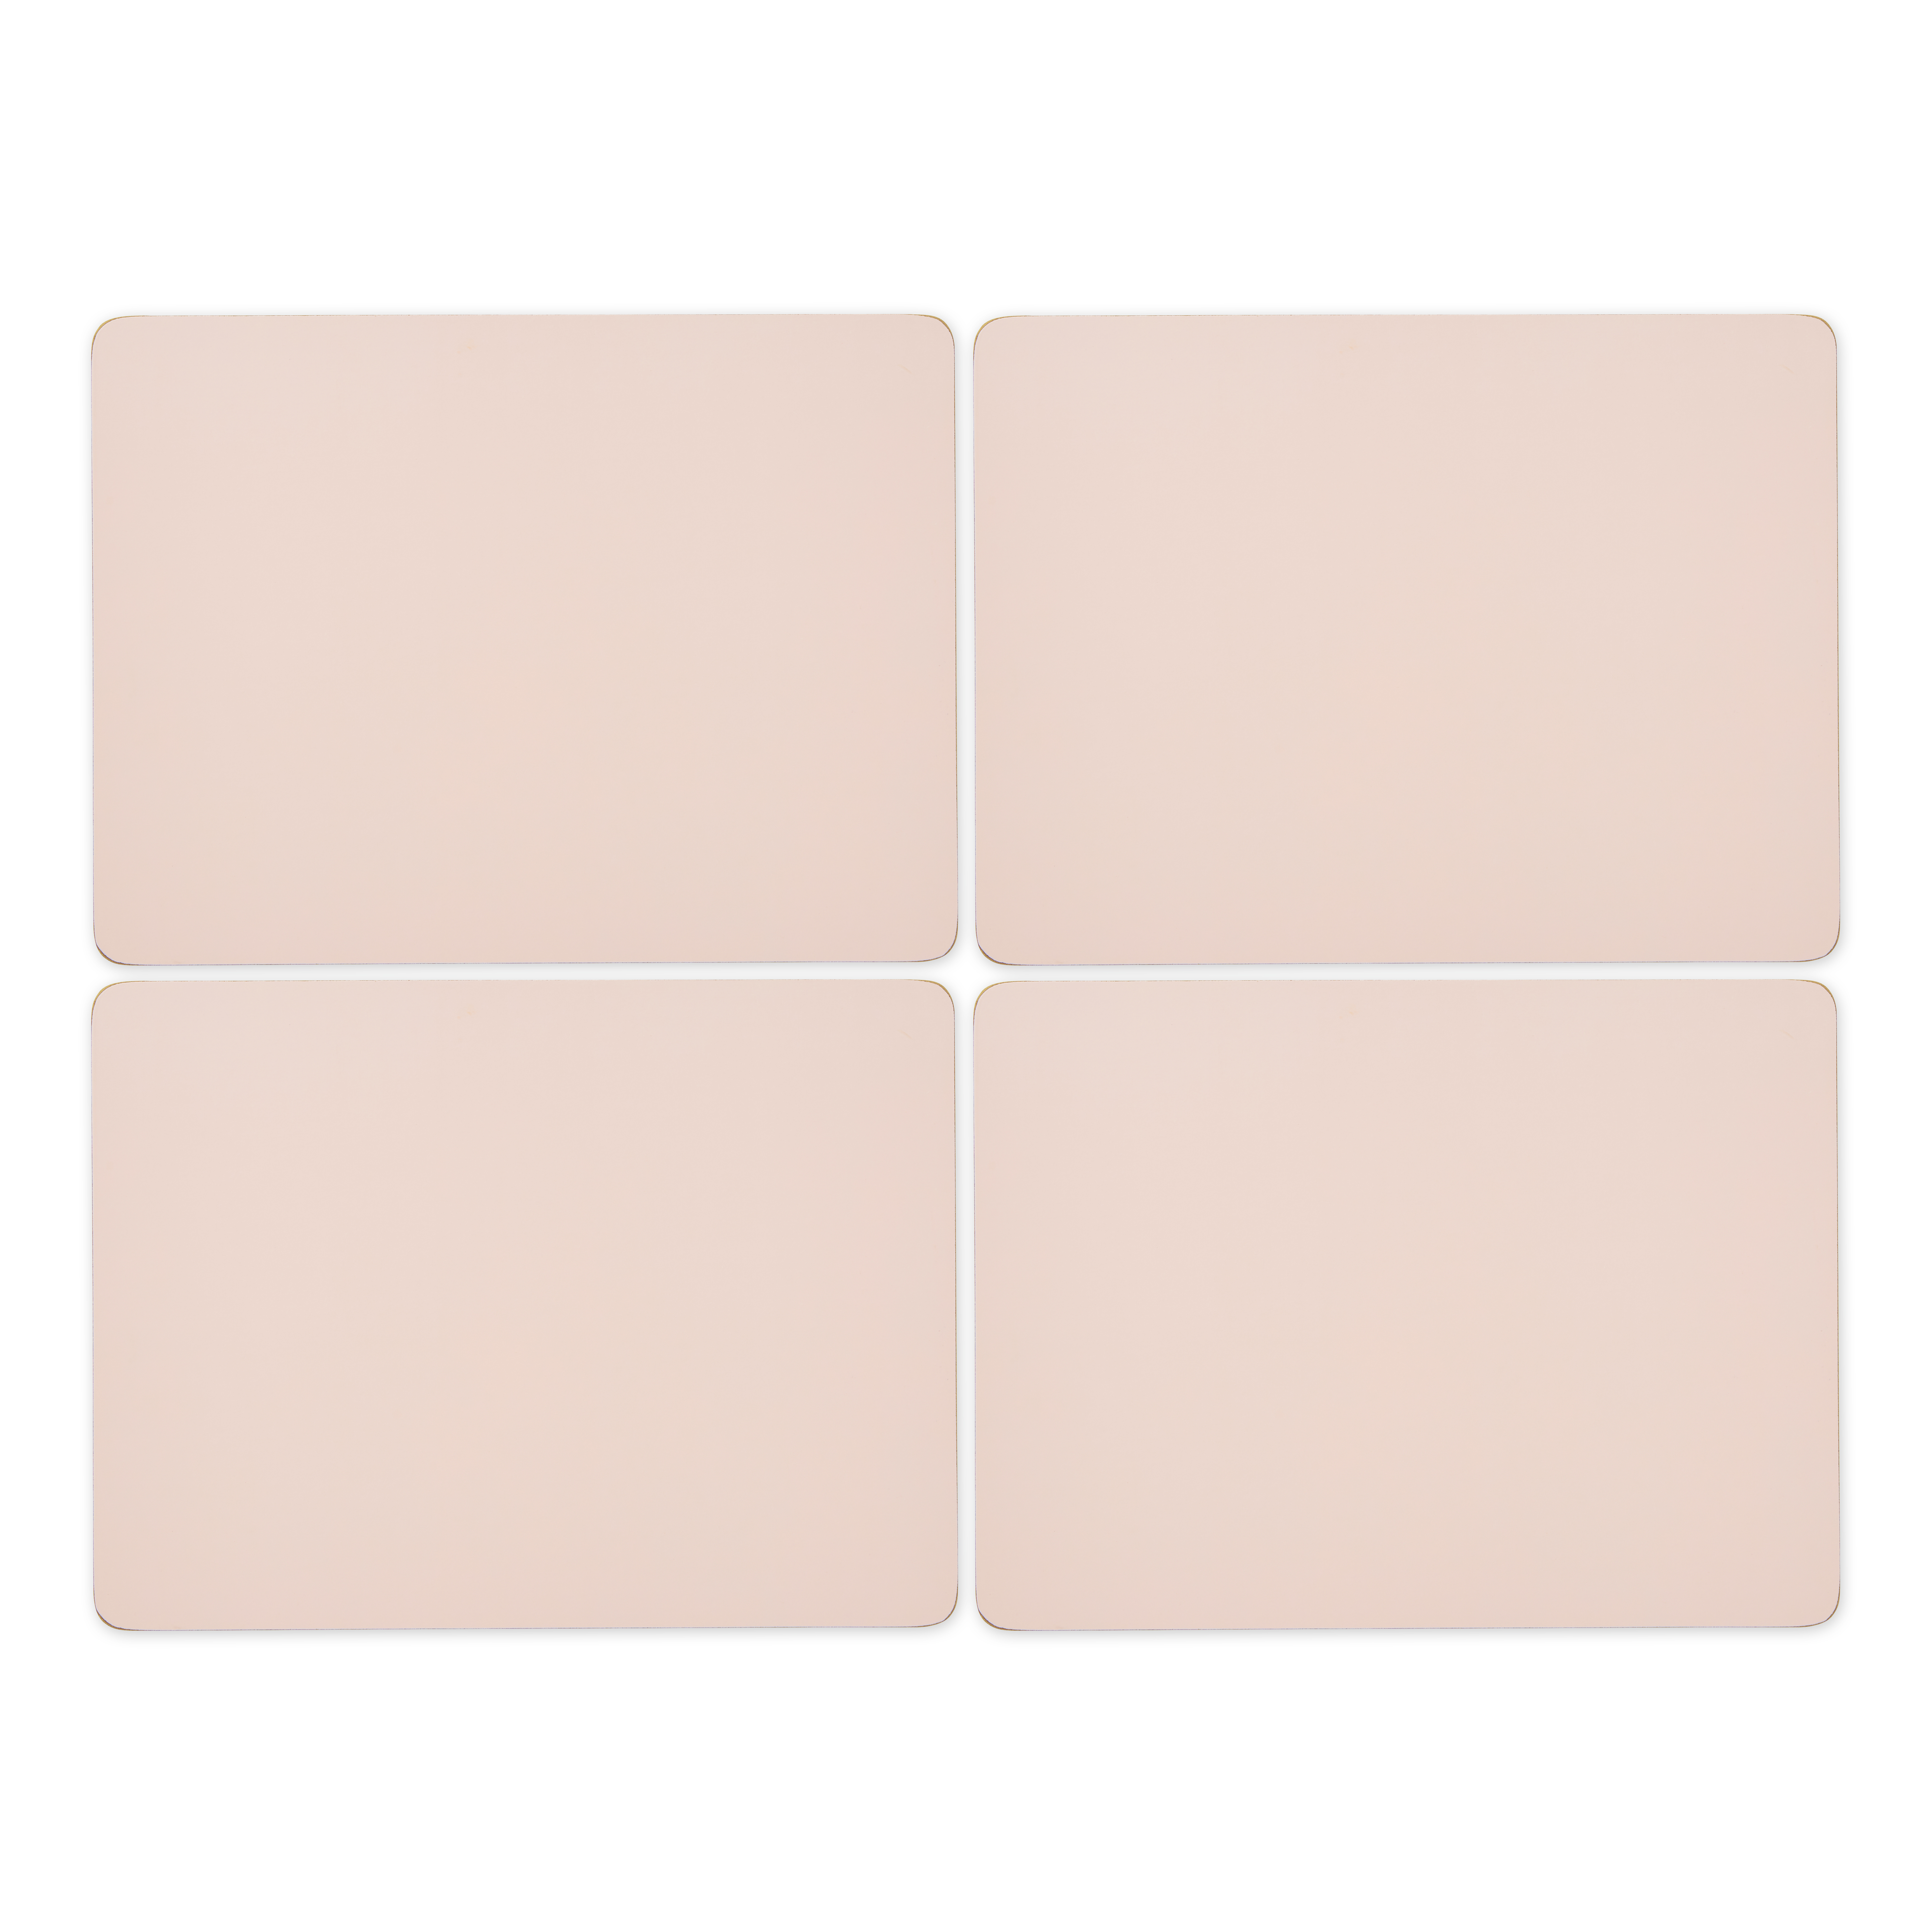 Millenial Pink Placemats Set of 4 image number null